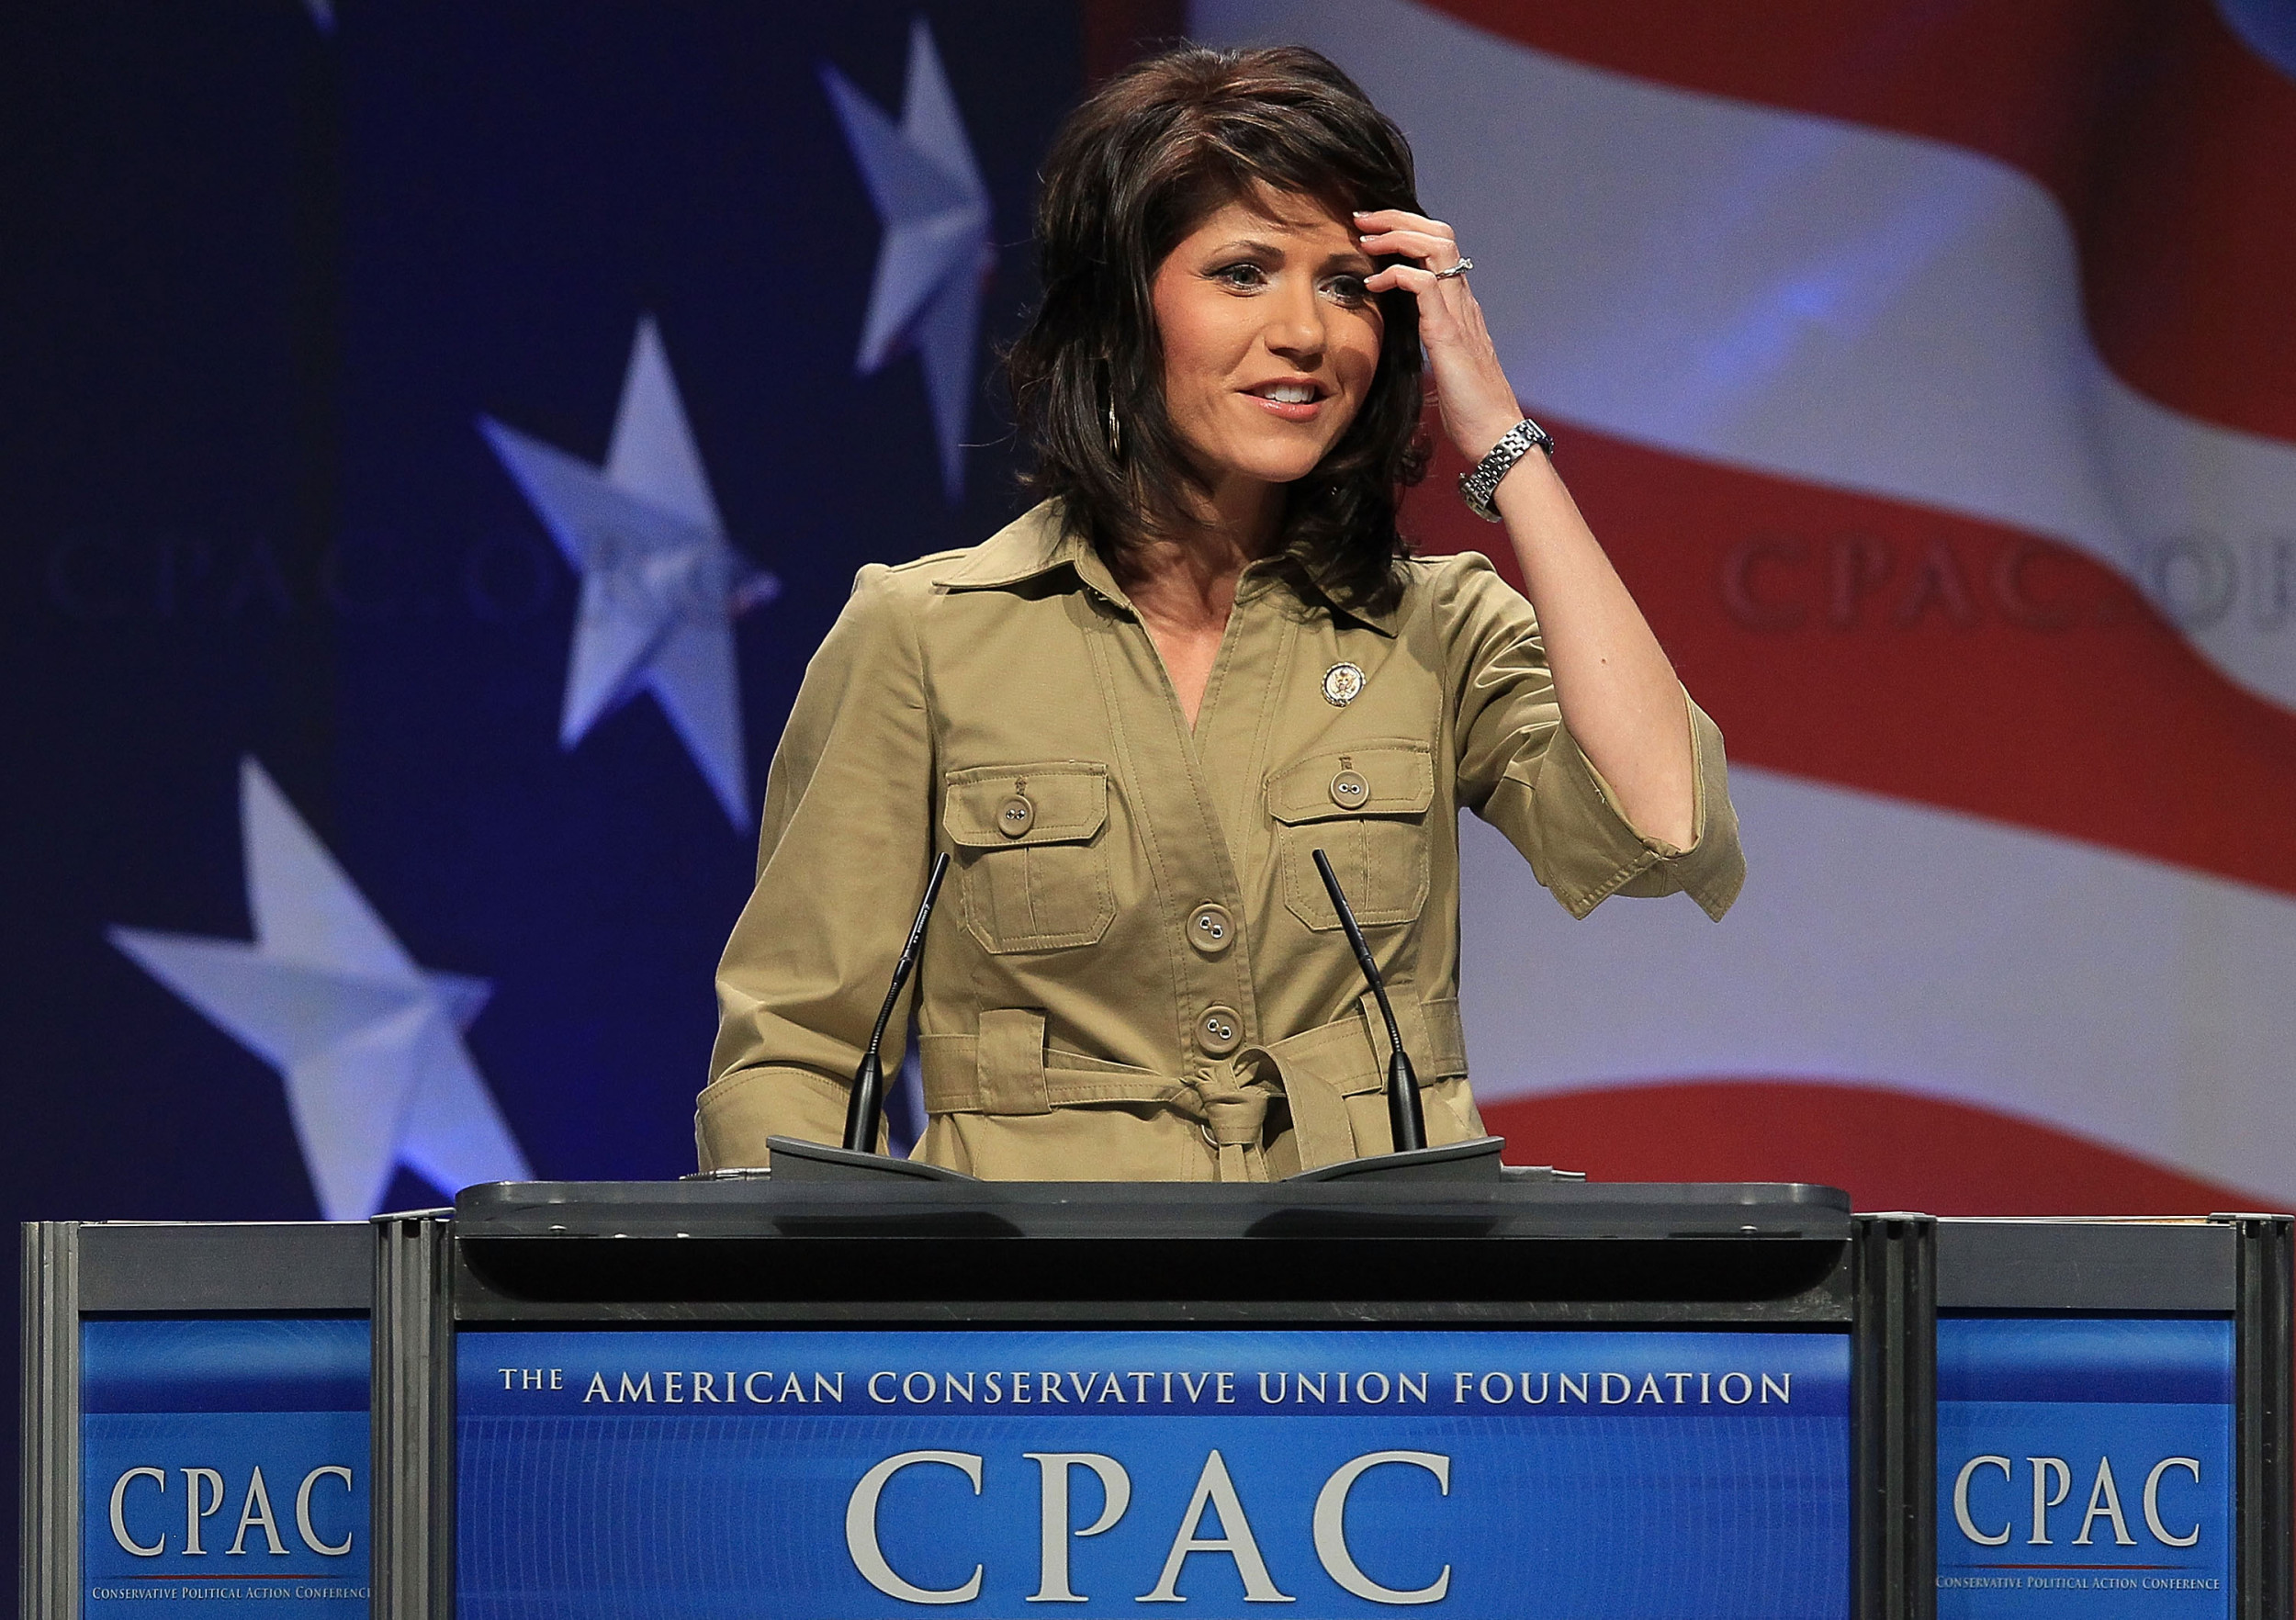 South Dakota Throws Parade For Governor Kristi Noem Who Declined To